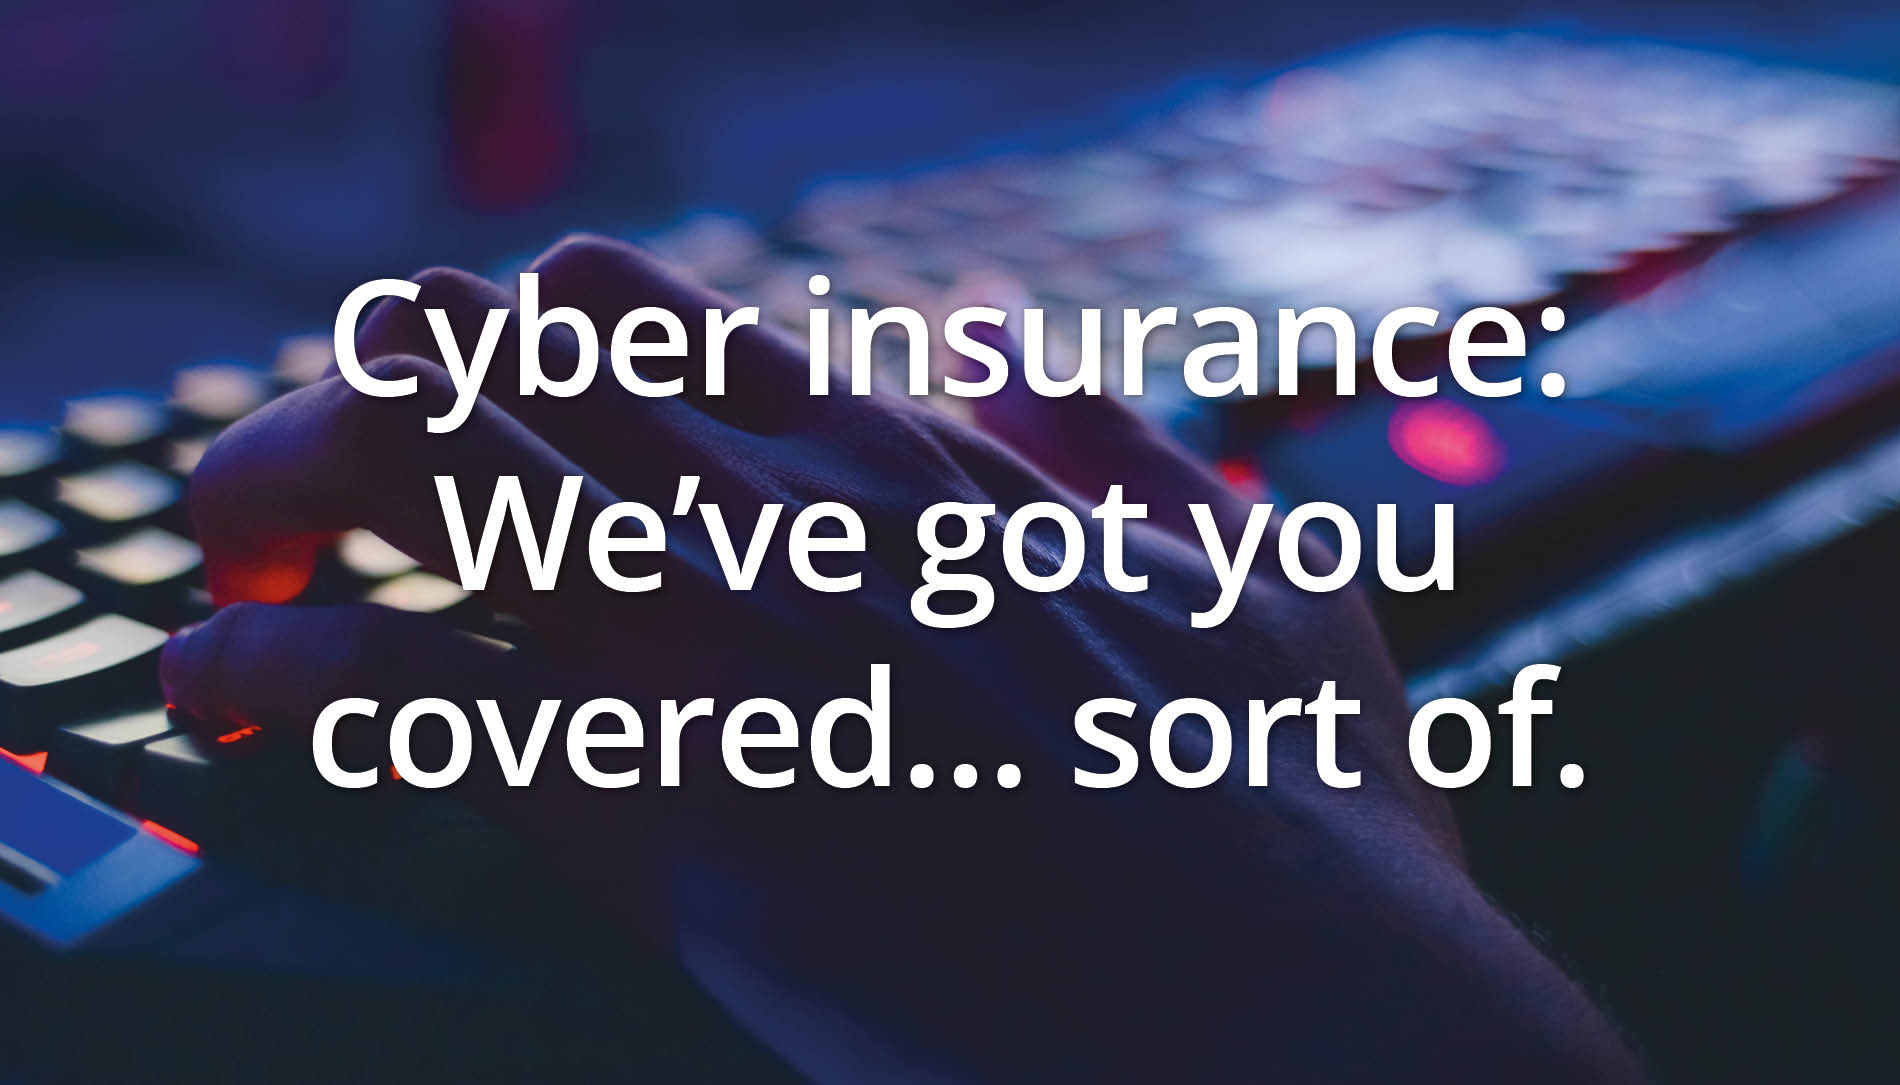 Cyber insurance: We’ve got you covered… sort of.